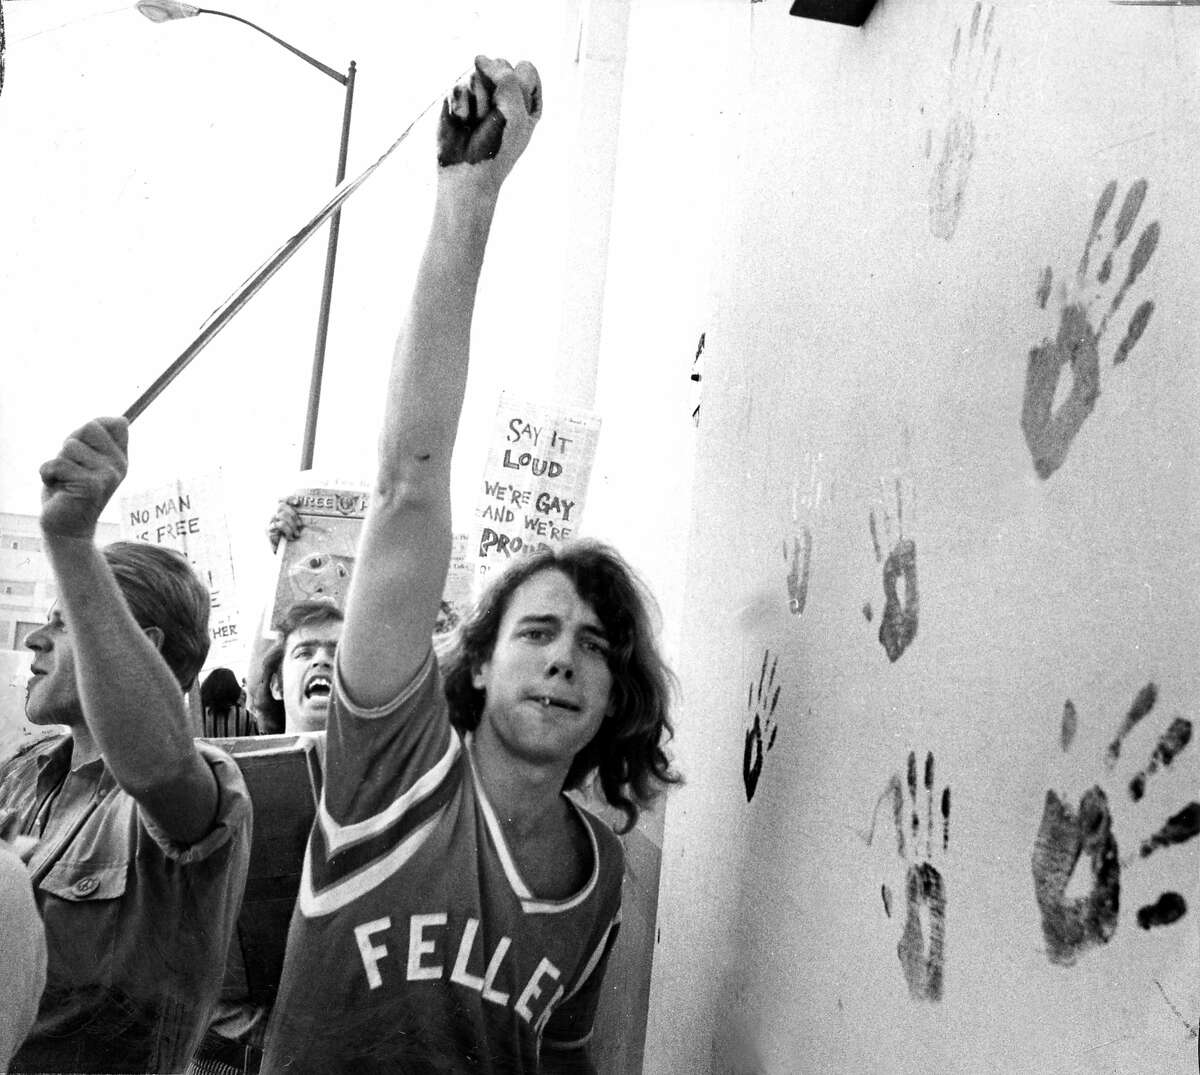 Nov. 1, 1969: Picketers support a pro-gay cause in 1969, using paint to make handprints on a San Francisco wall.